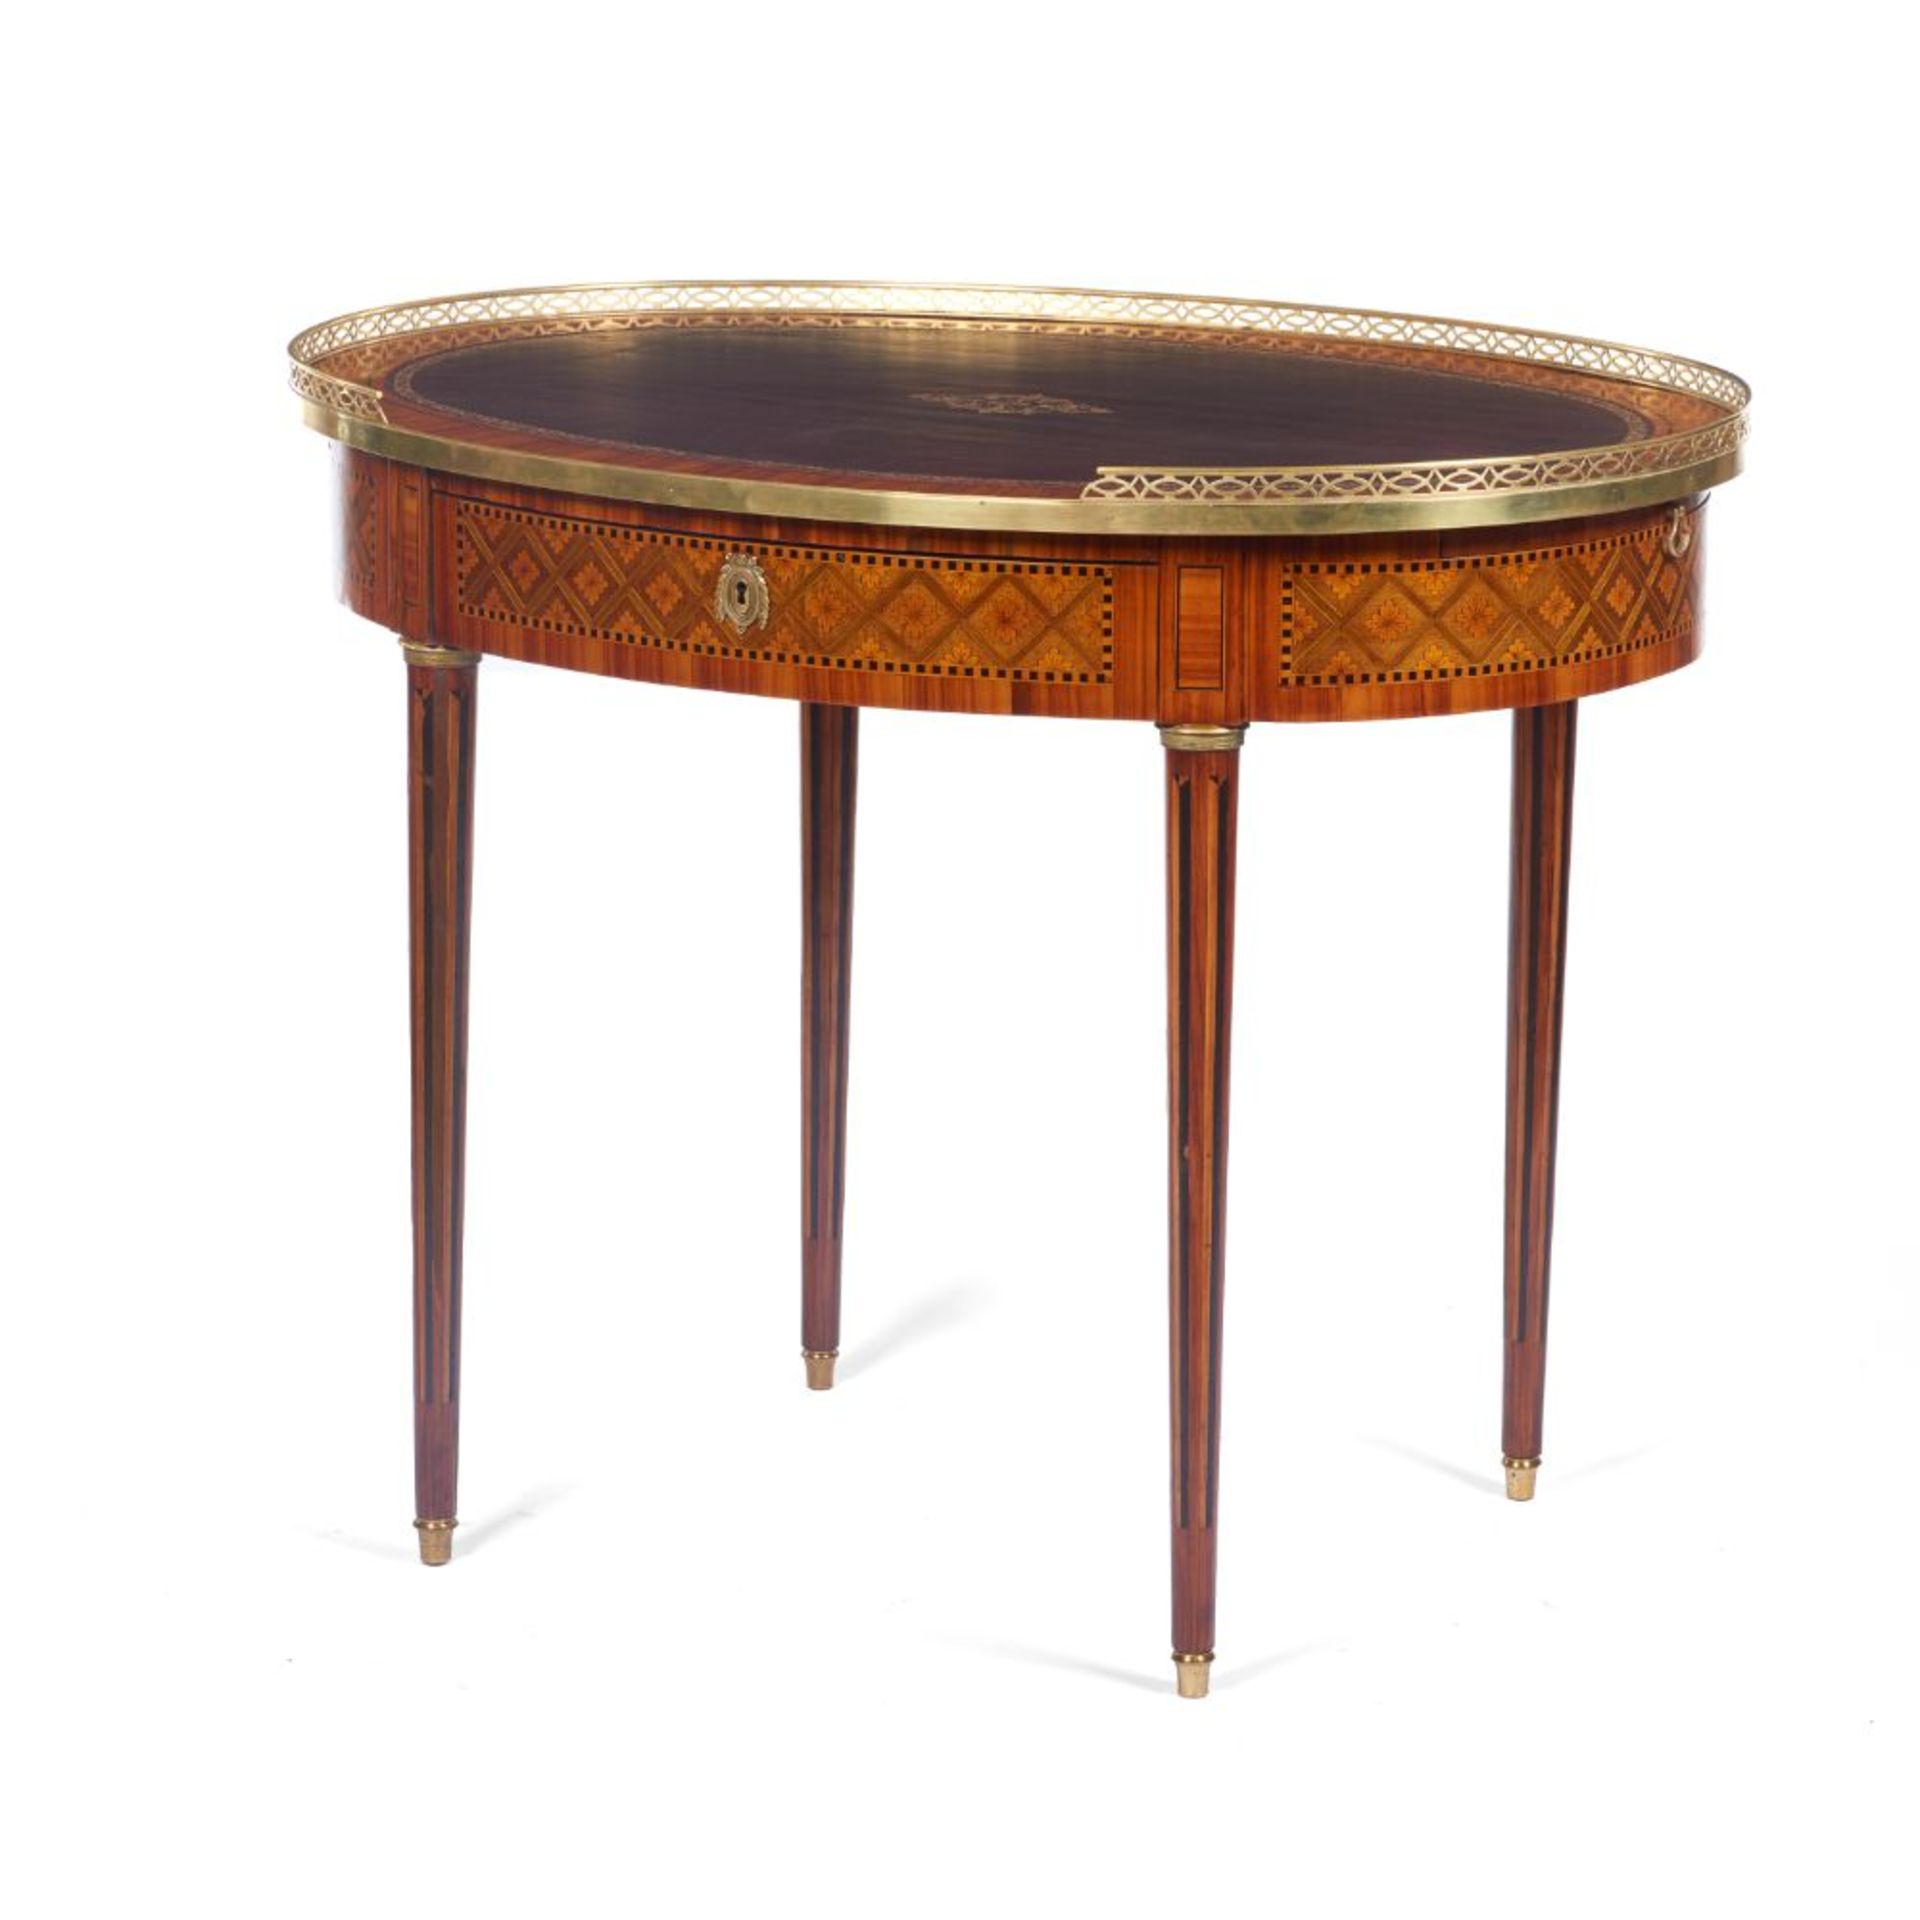 A Louis XVI style oval lady's desk, Rosewood veneered of satinwood, jacaranda, rosewood and other